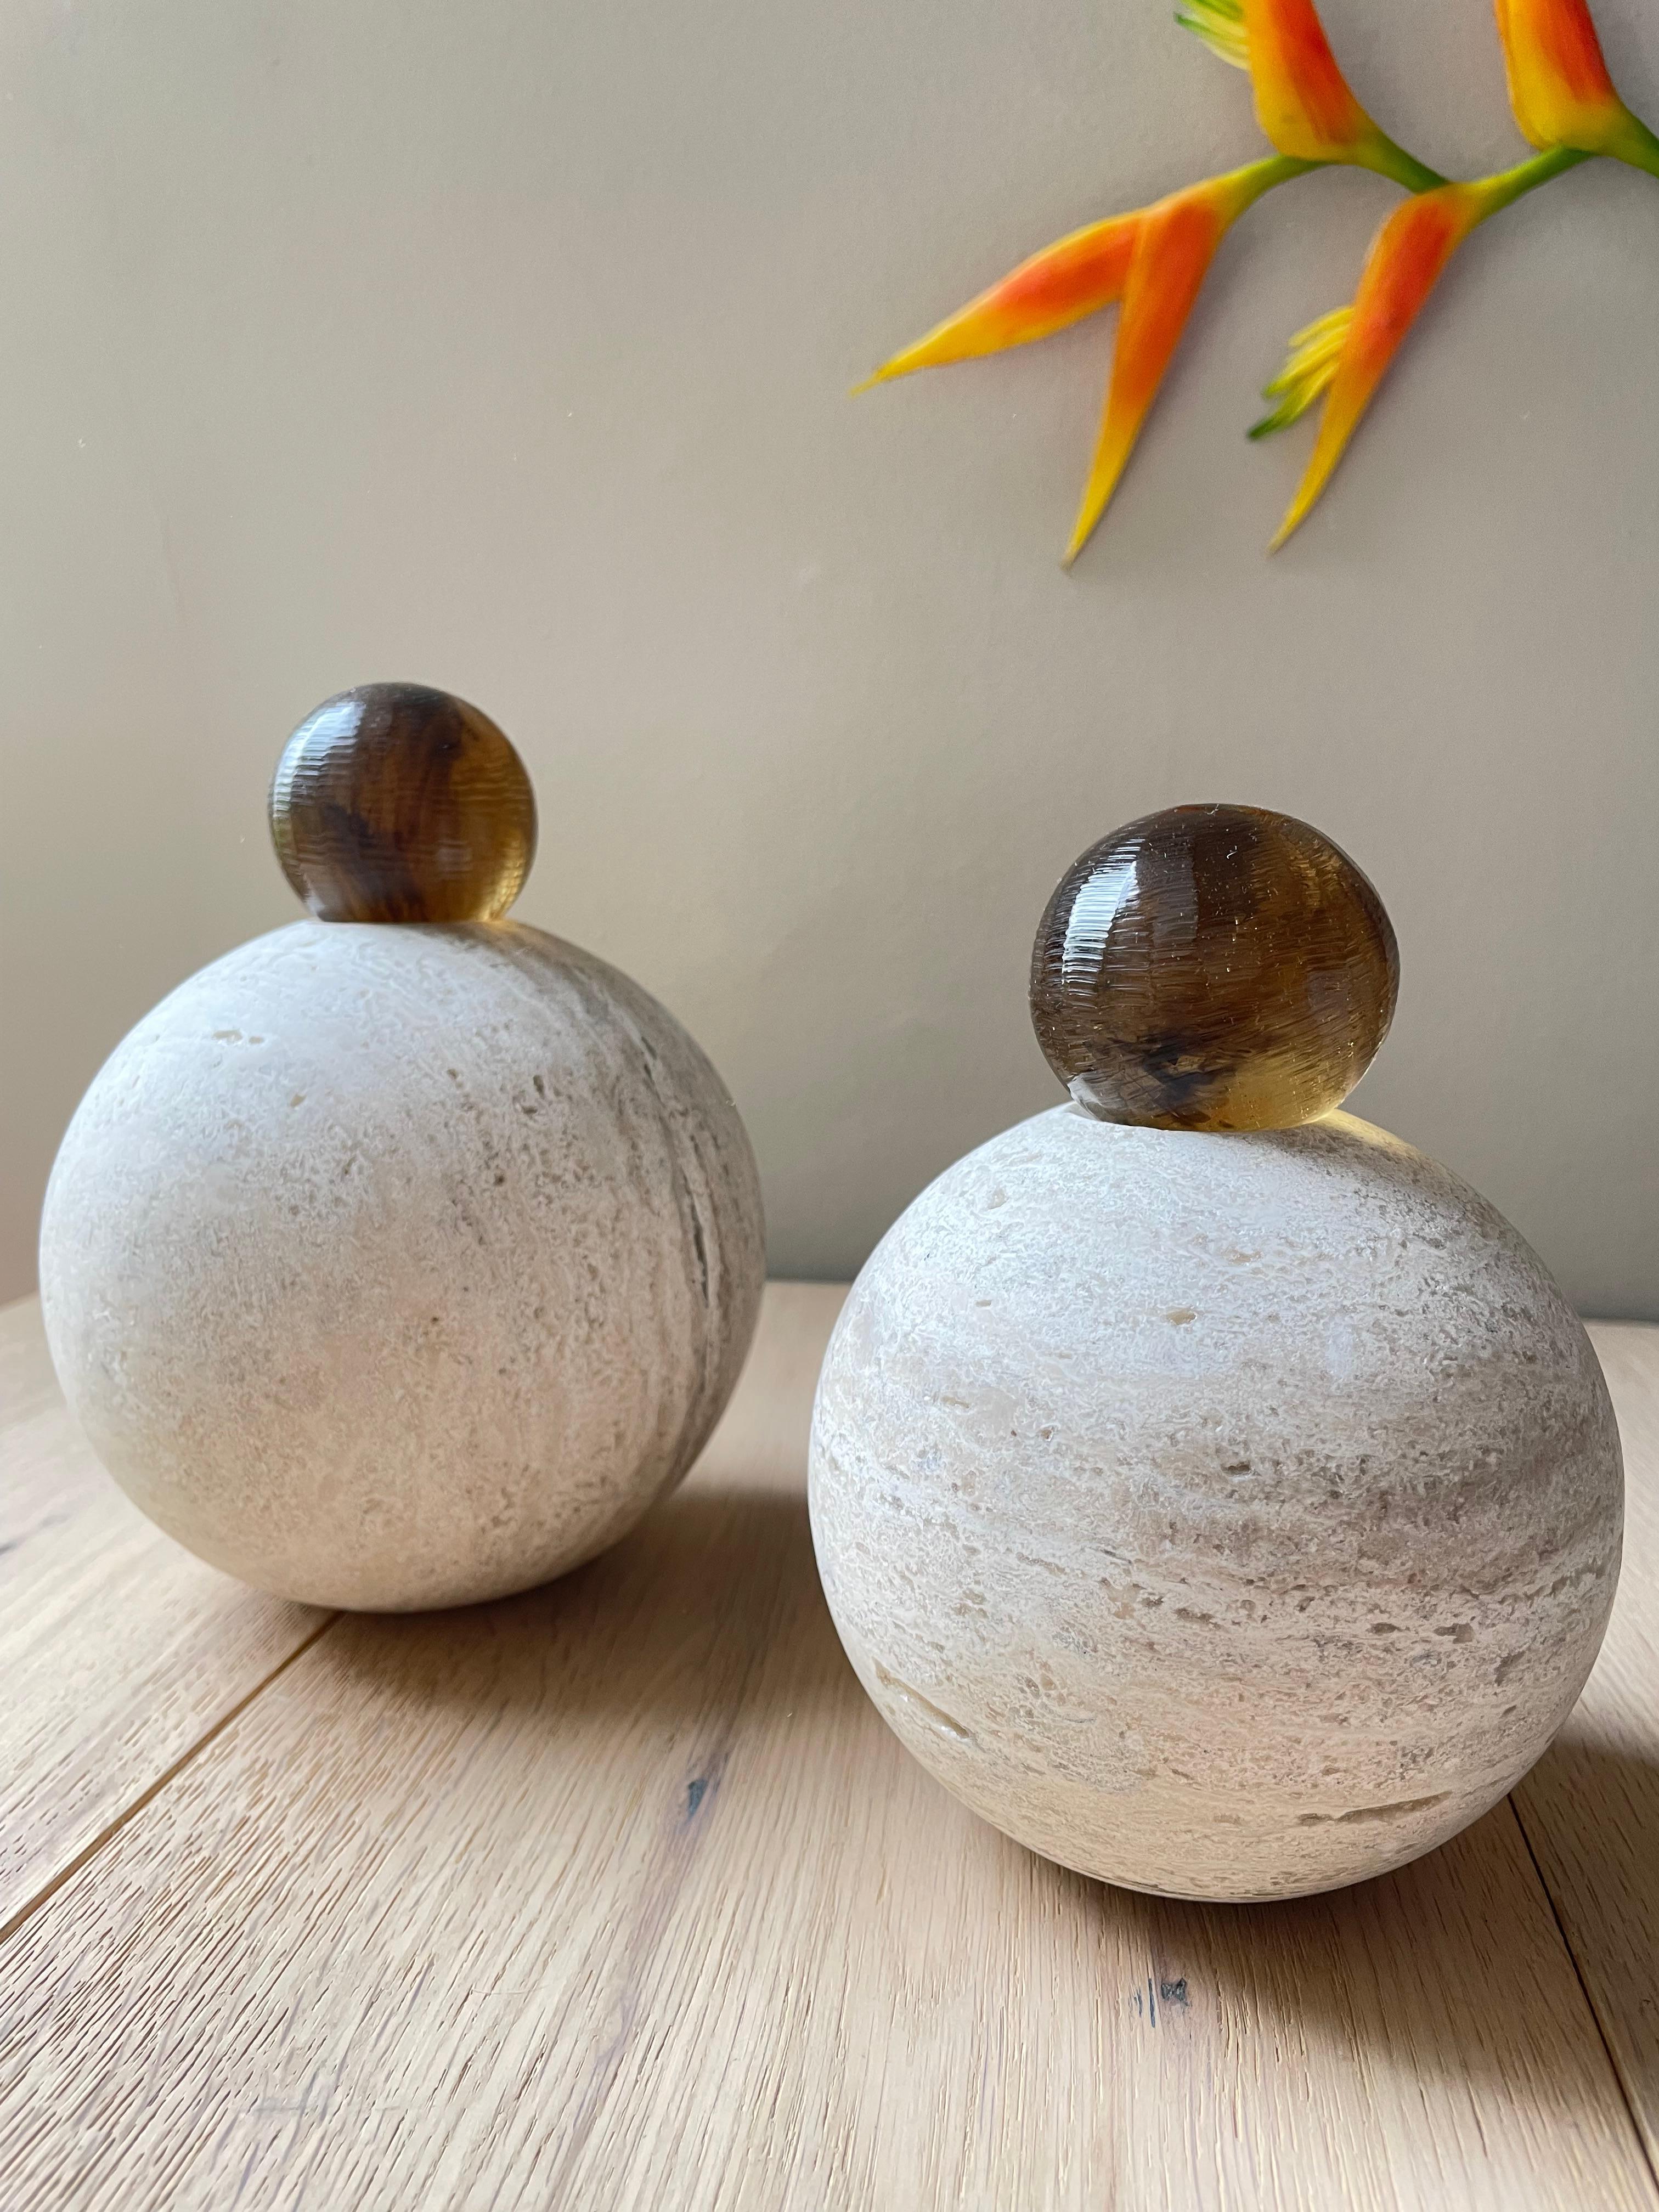 Our stack sphere sculptures can be used as a decorative element on a coffee table, bookshelf, console etc. Their warm hue and curved lines add the right amount of visual interest without overwhelming additional decor. The mix of marble and resin